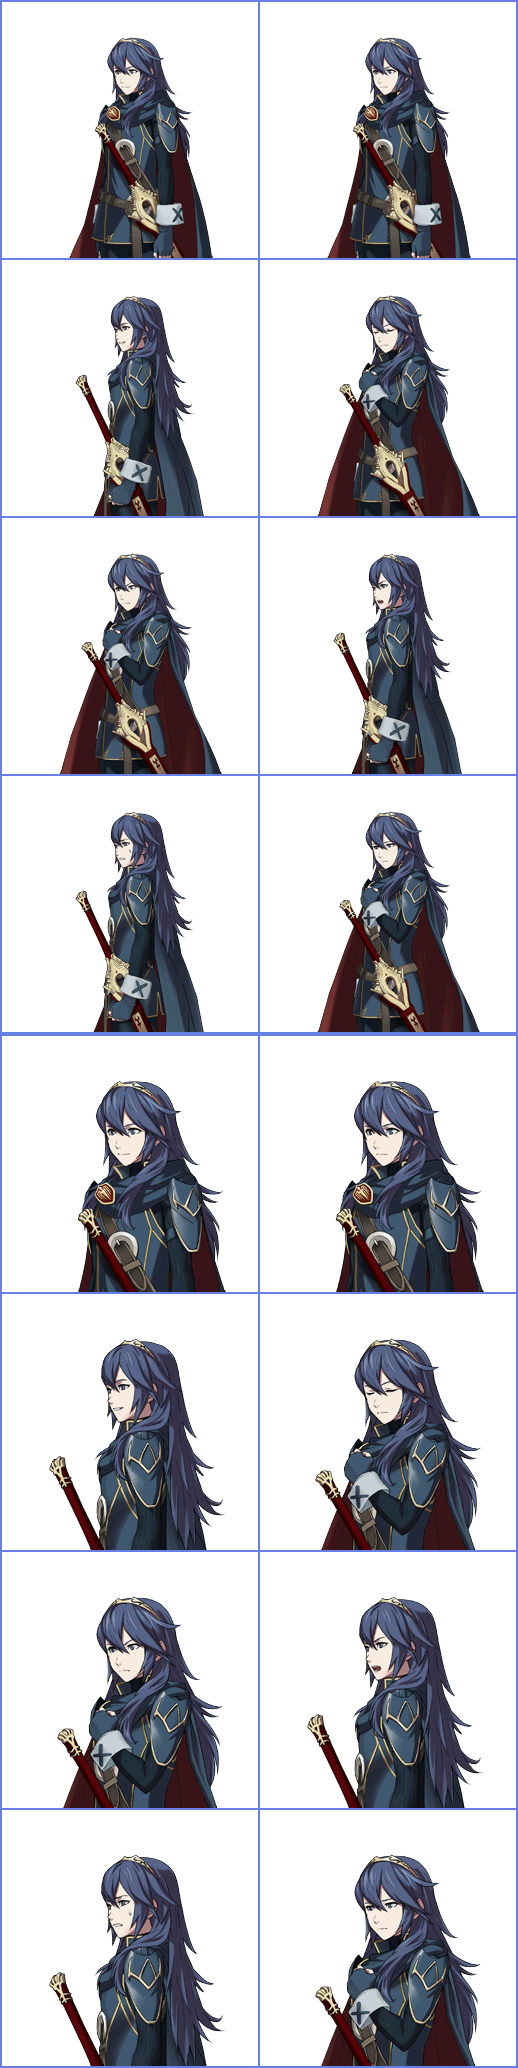 Project X Zone 2 - Lucina